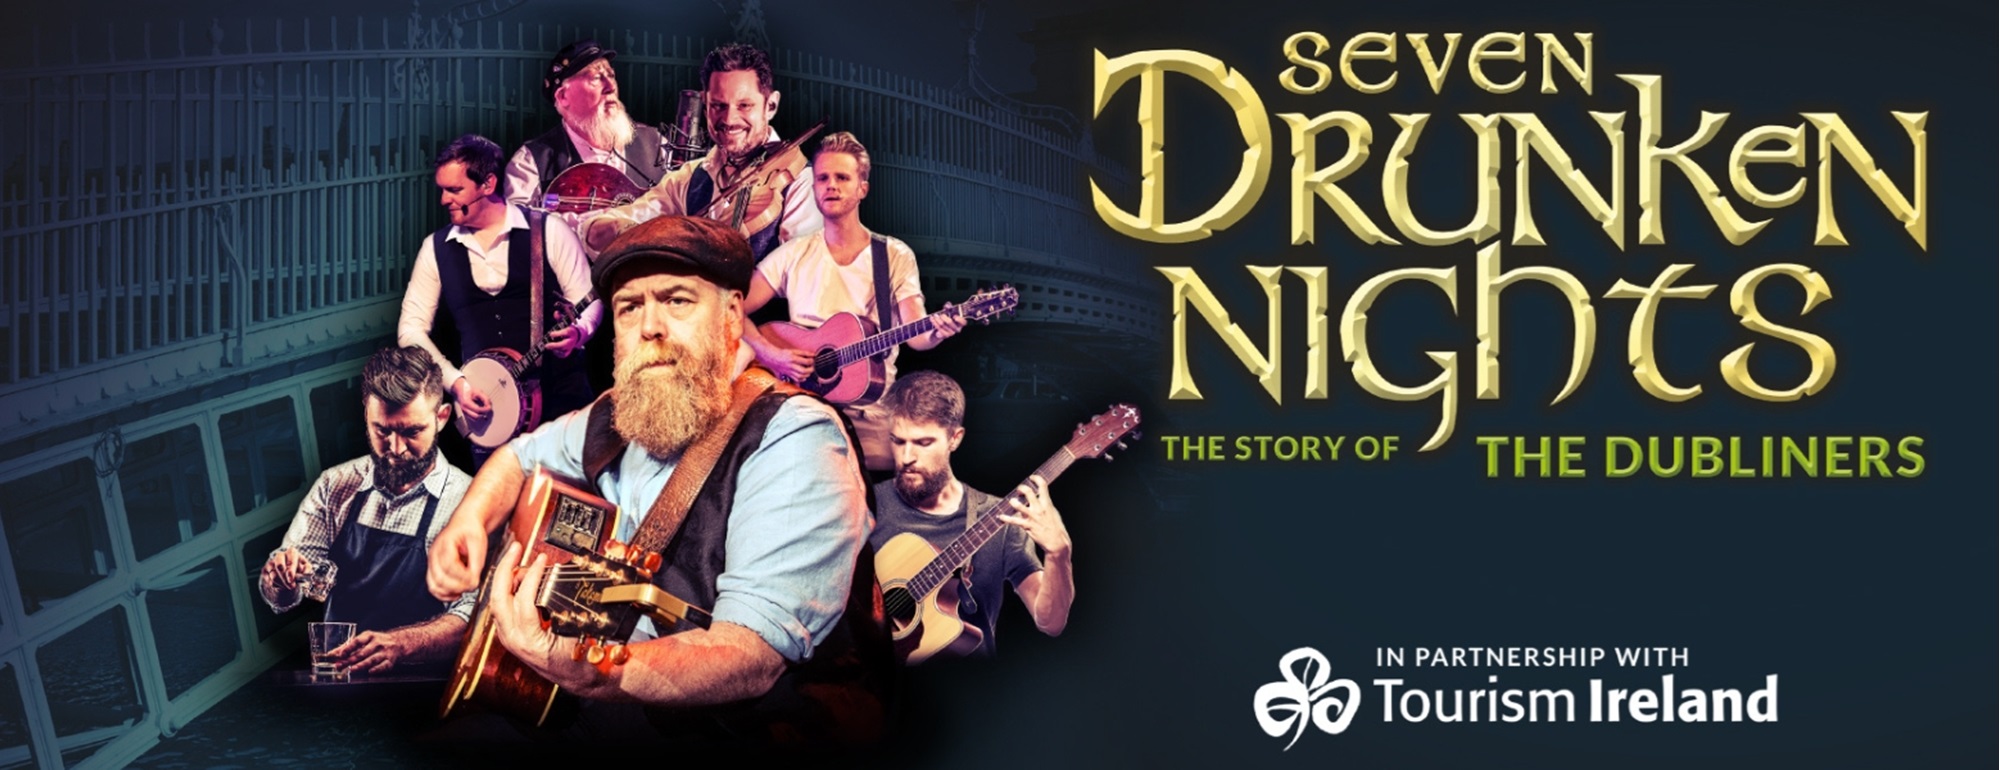 A composite banner of the Seven Drunken Nights band against an emerald background